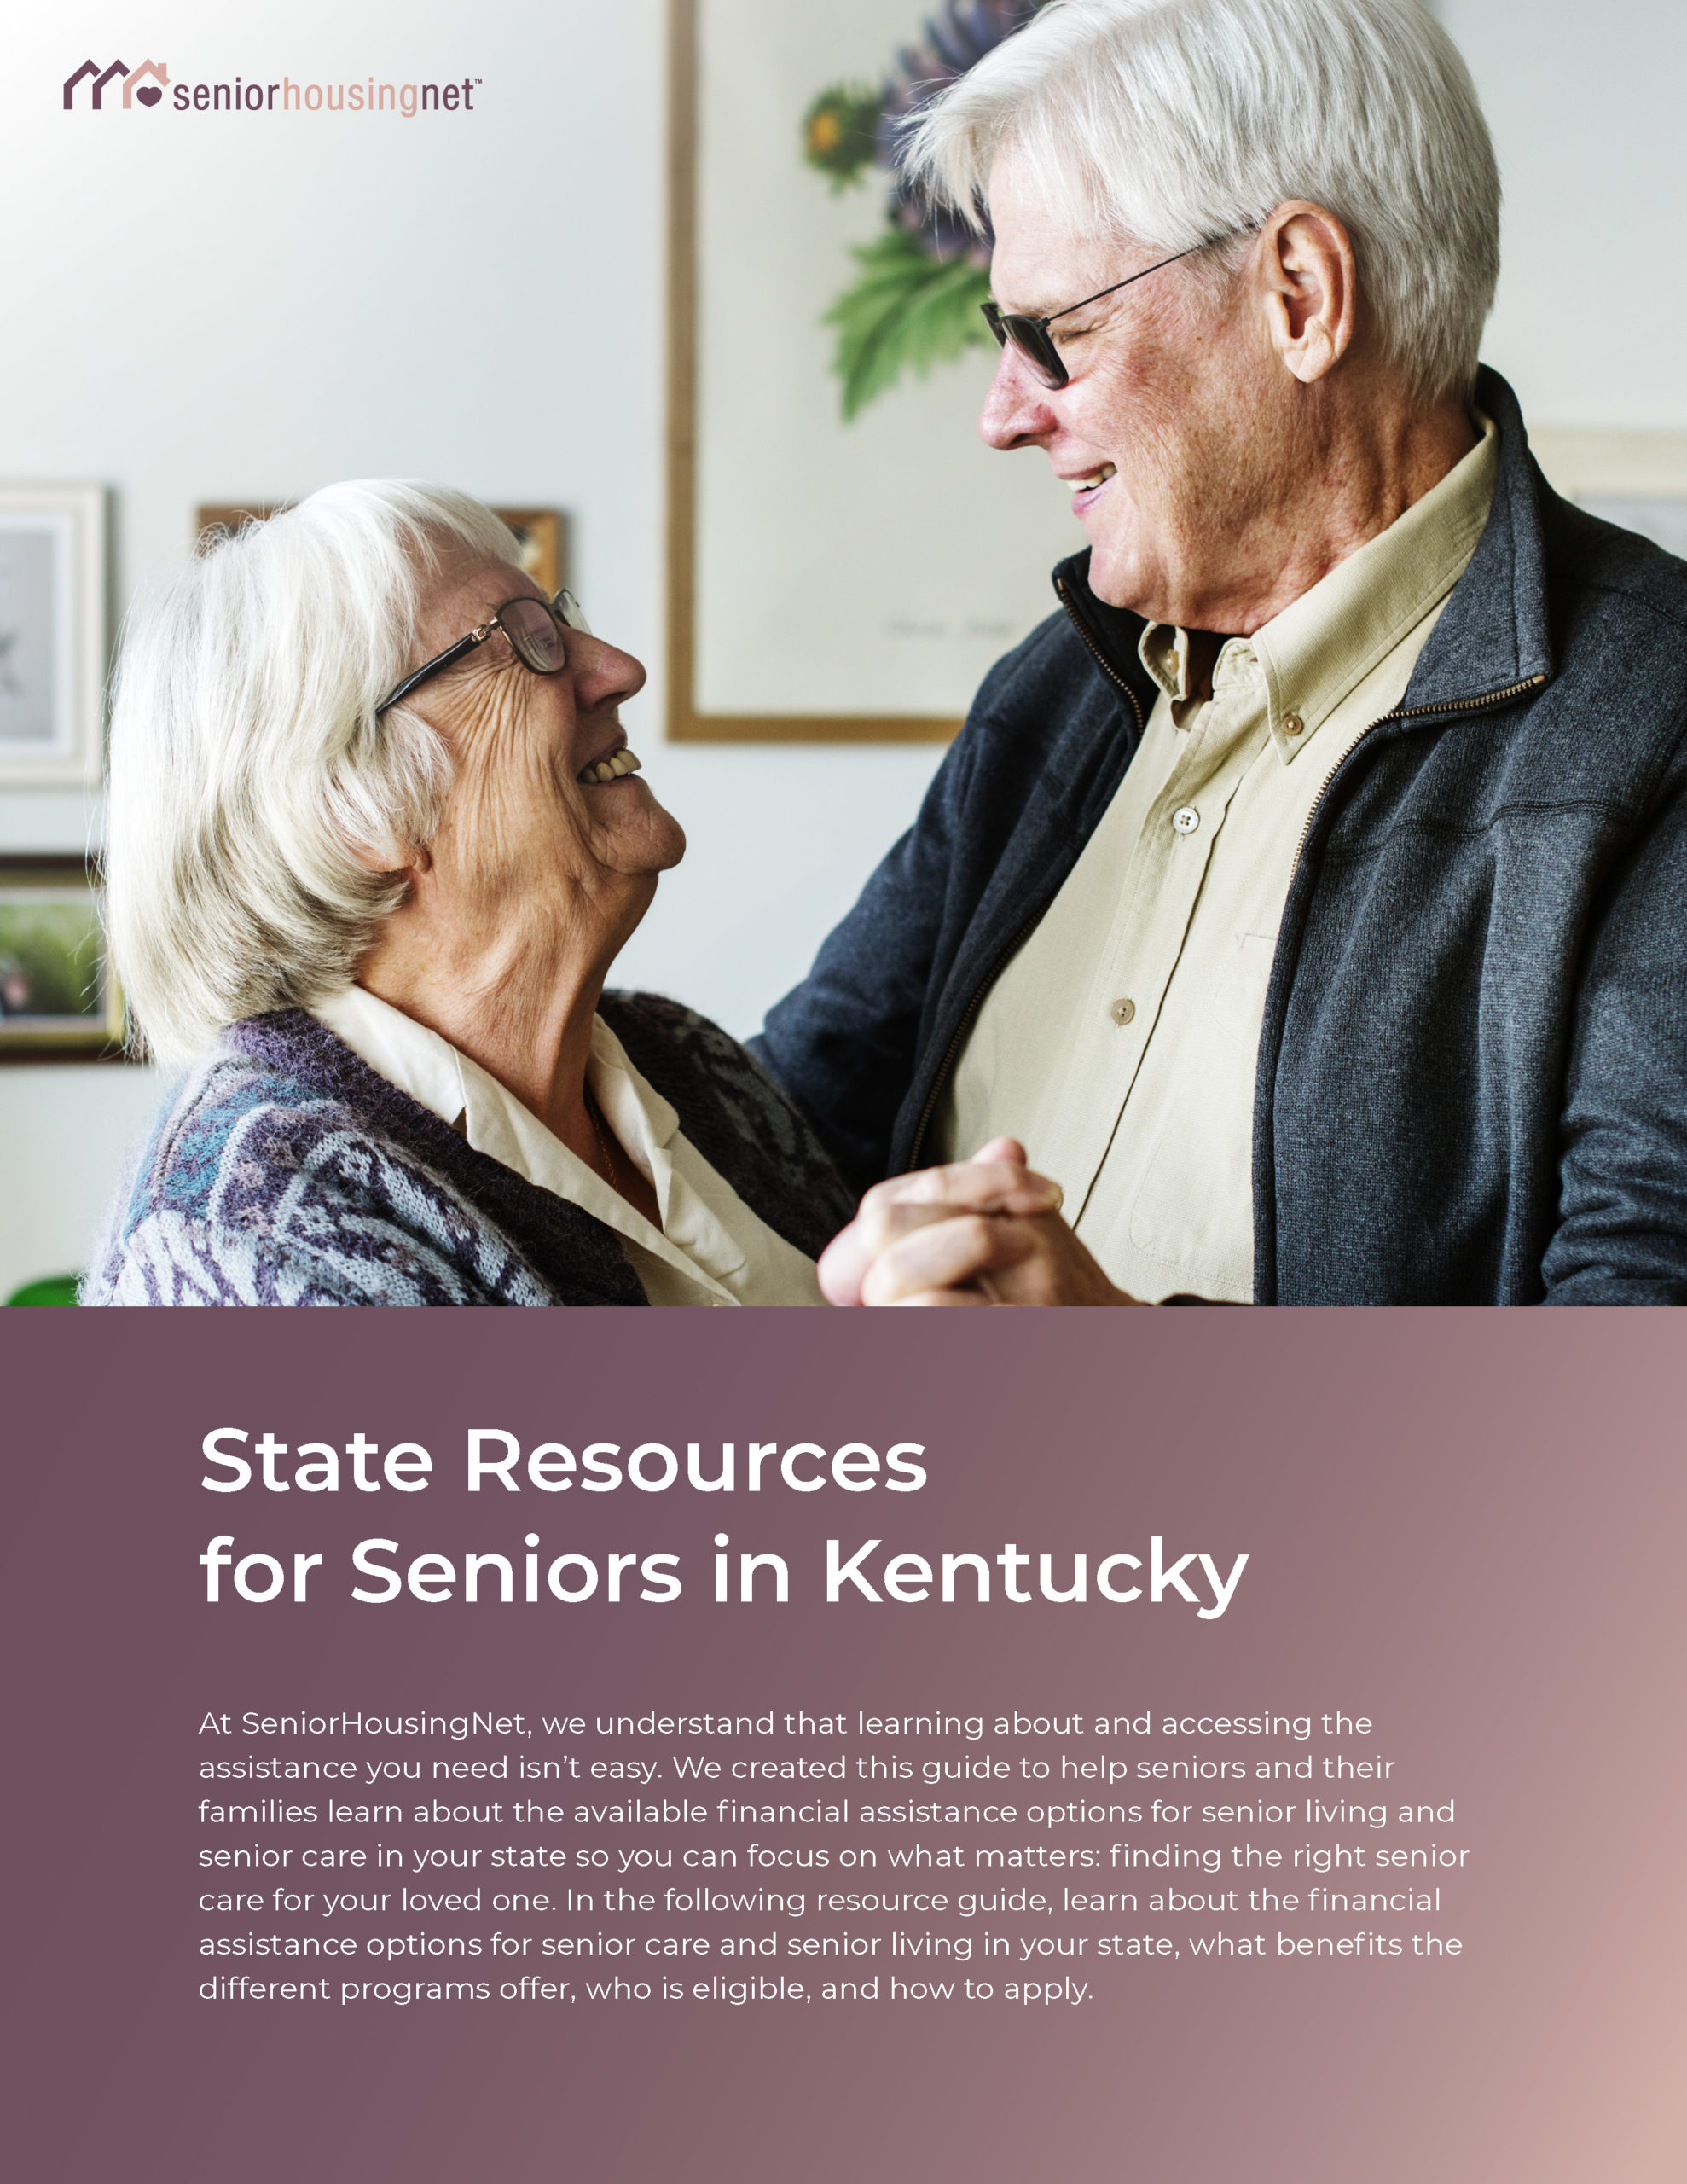 State Resources for Seniors in Kentucky